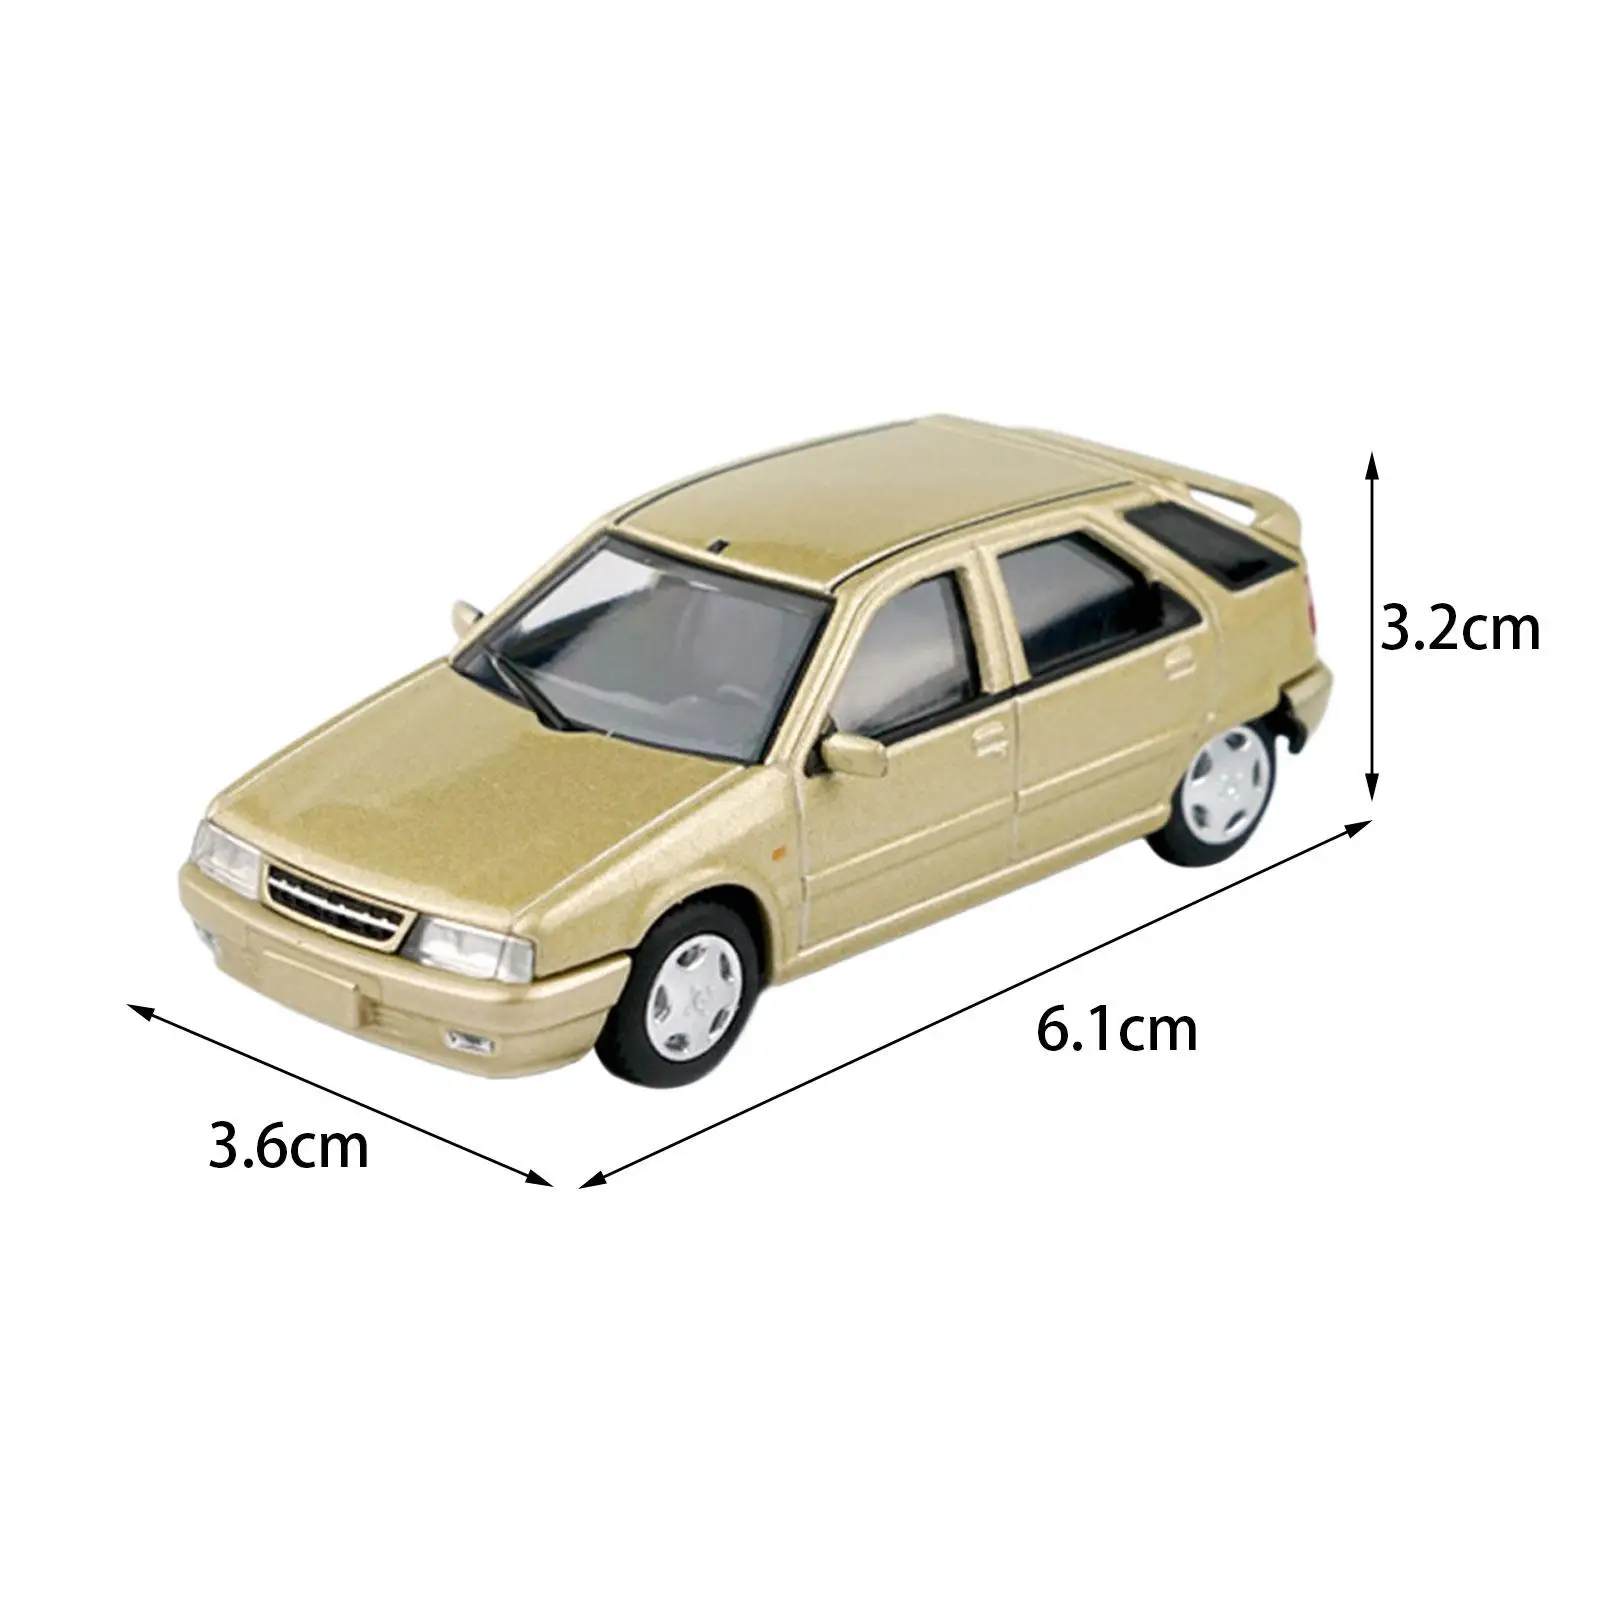 

1/64 Car Model Alloy Casting Realistic Diecast Model Car Collectible Toy Car for Vehicle Furnishings Gift Display Role Play